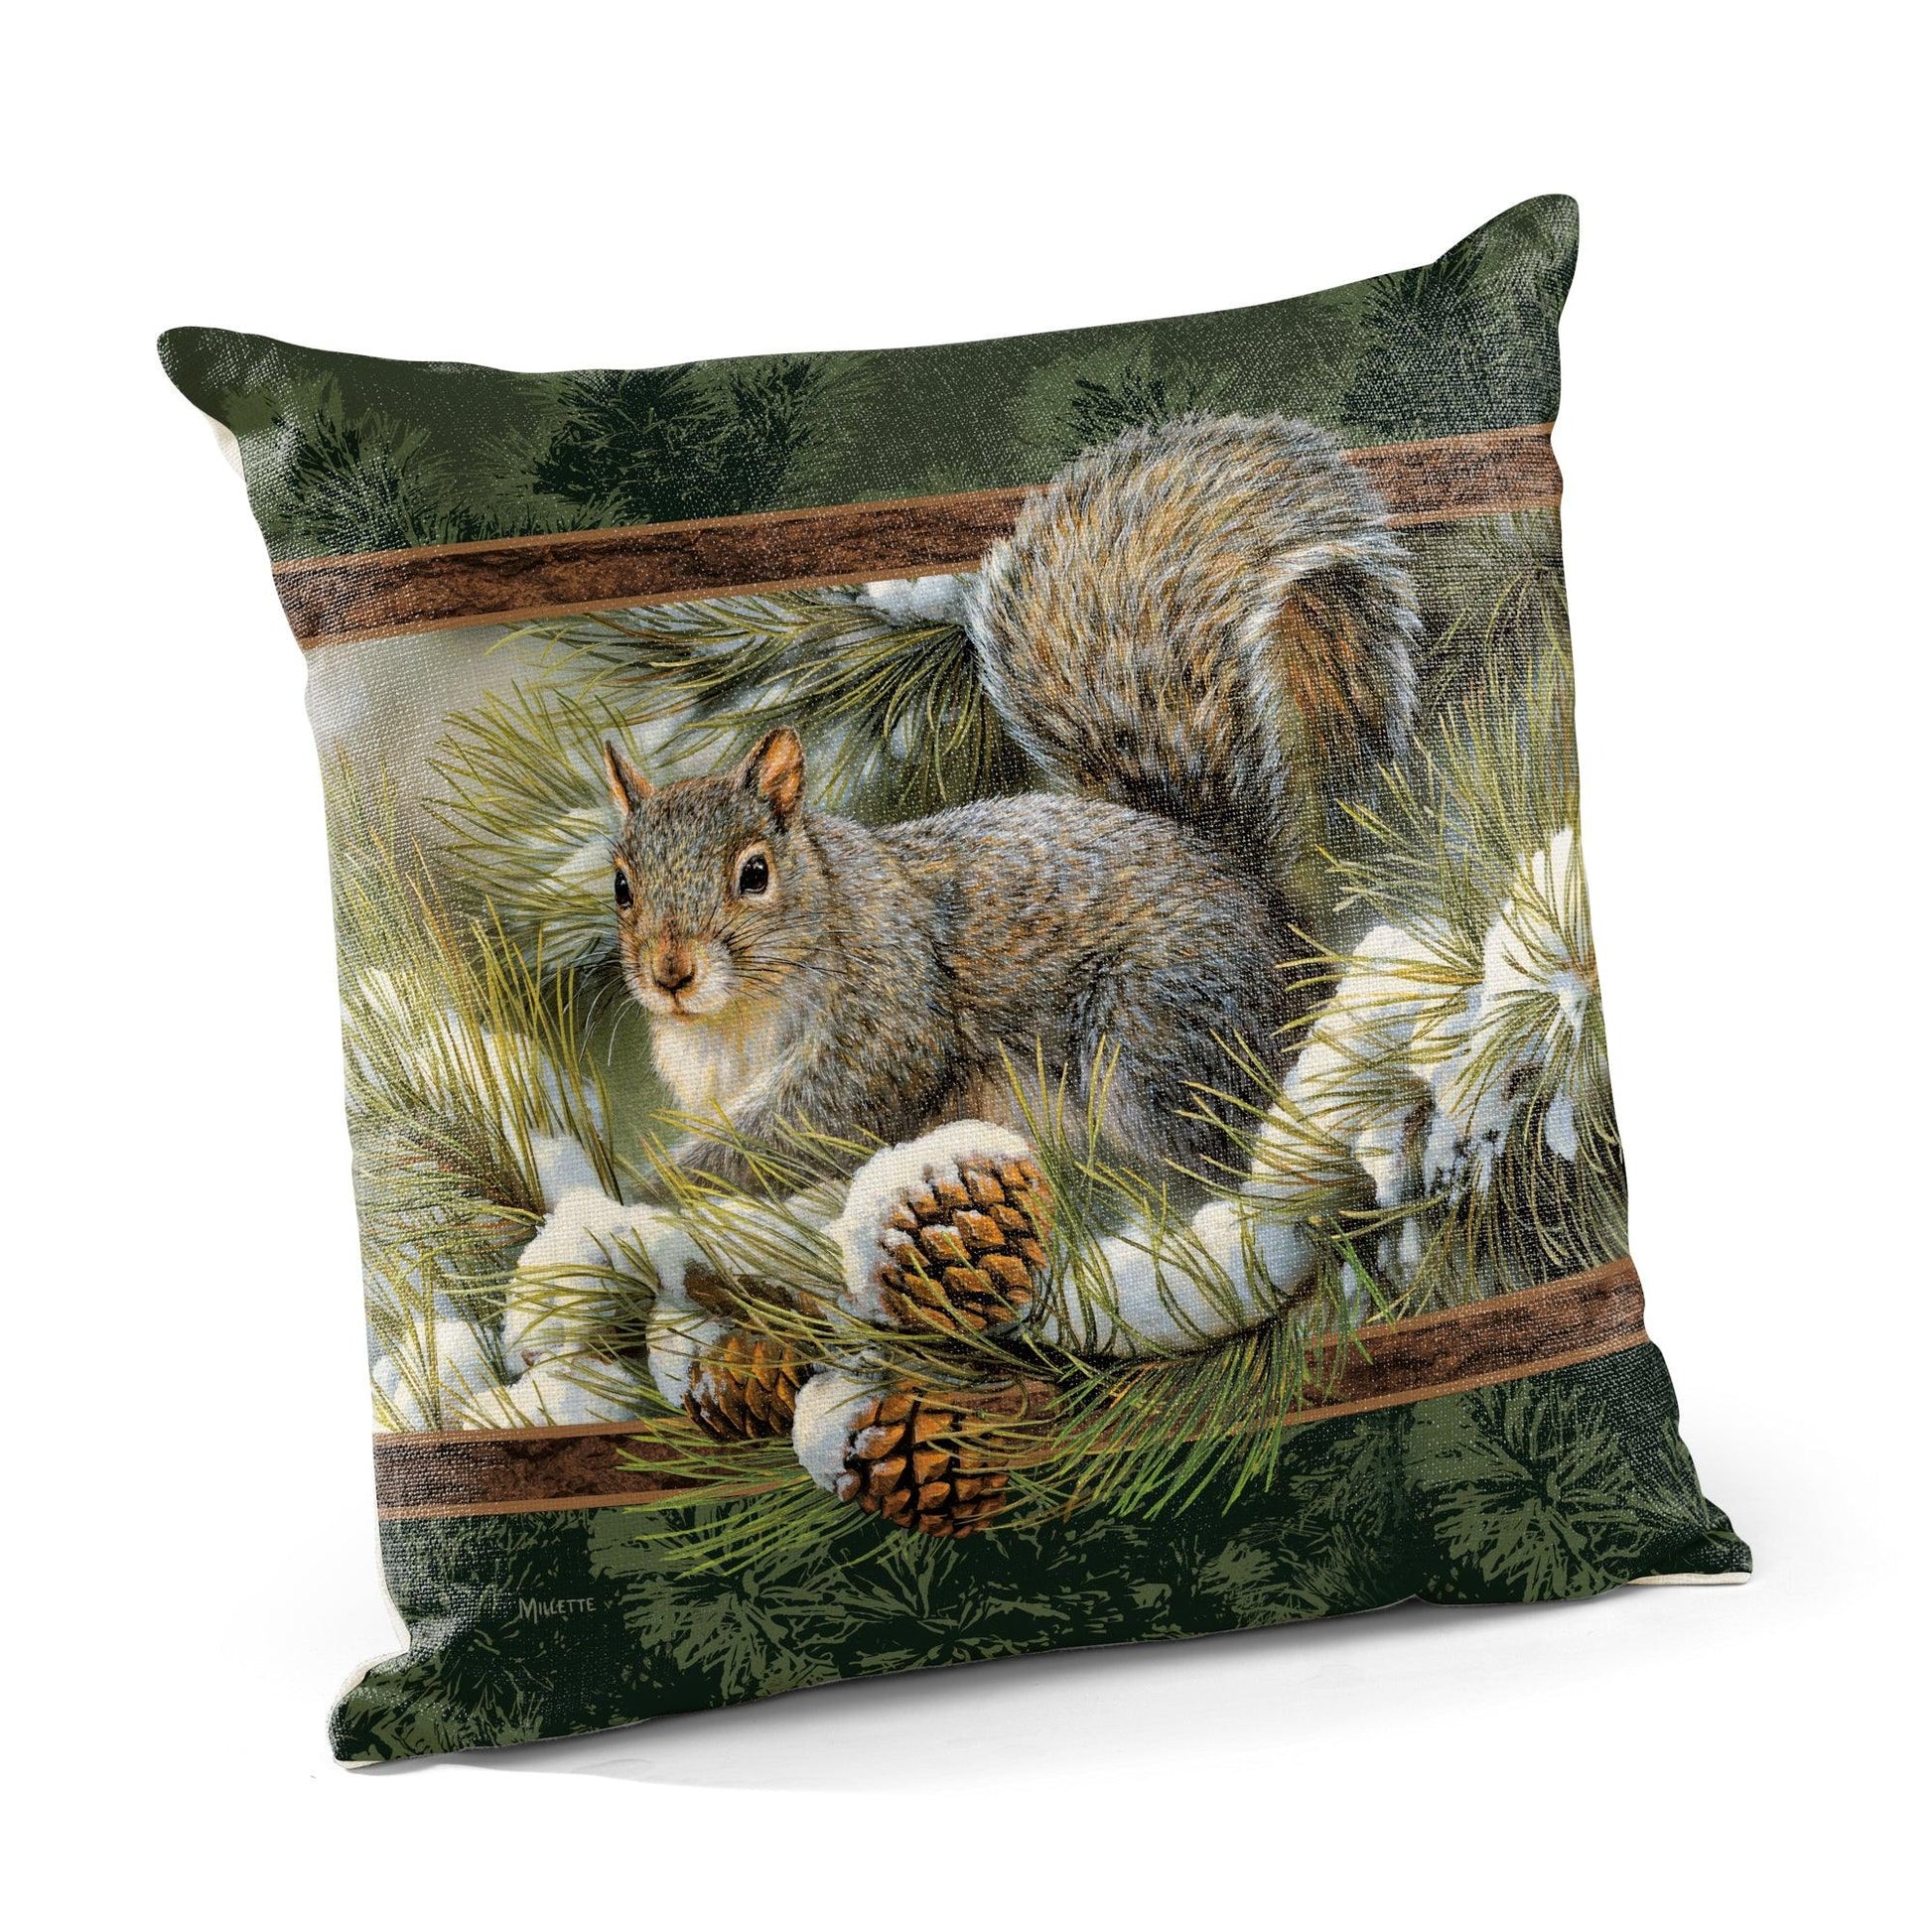 Gray Squirrel 18" Decorative Pillow - Wild Wings